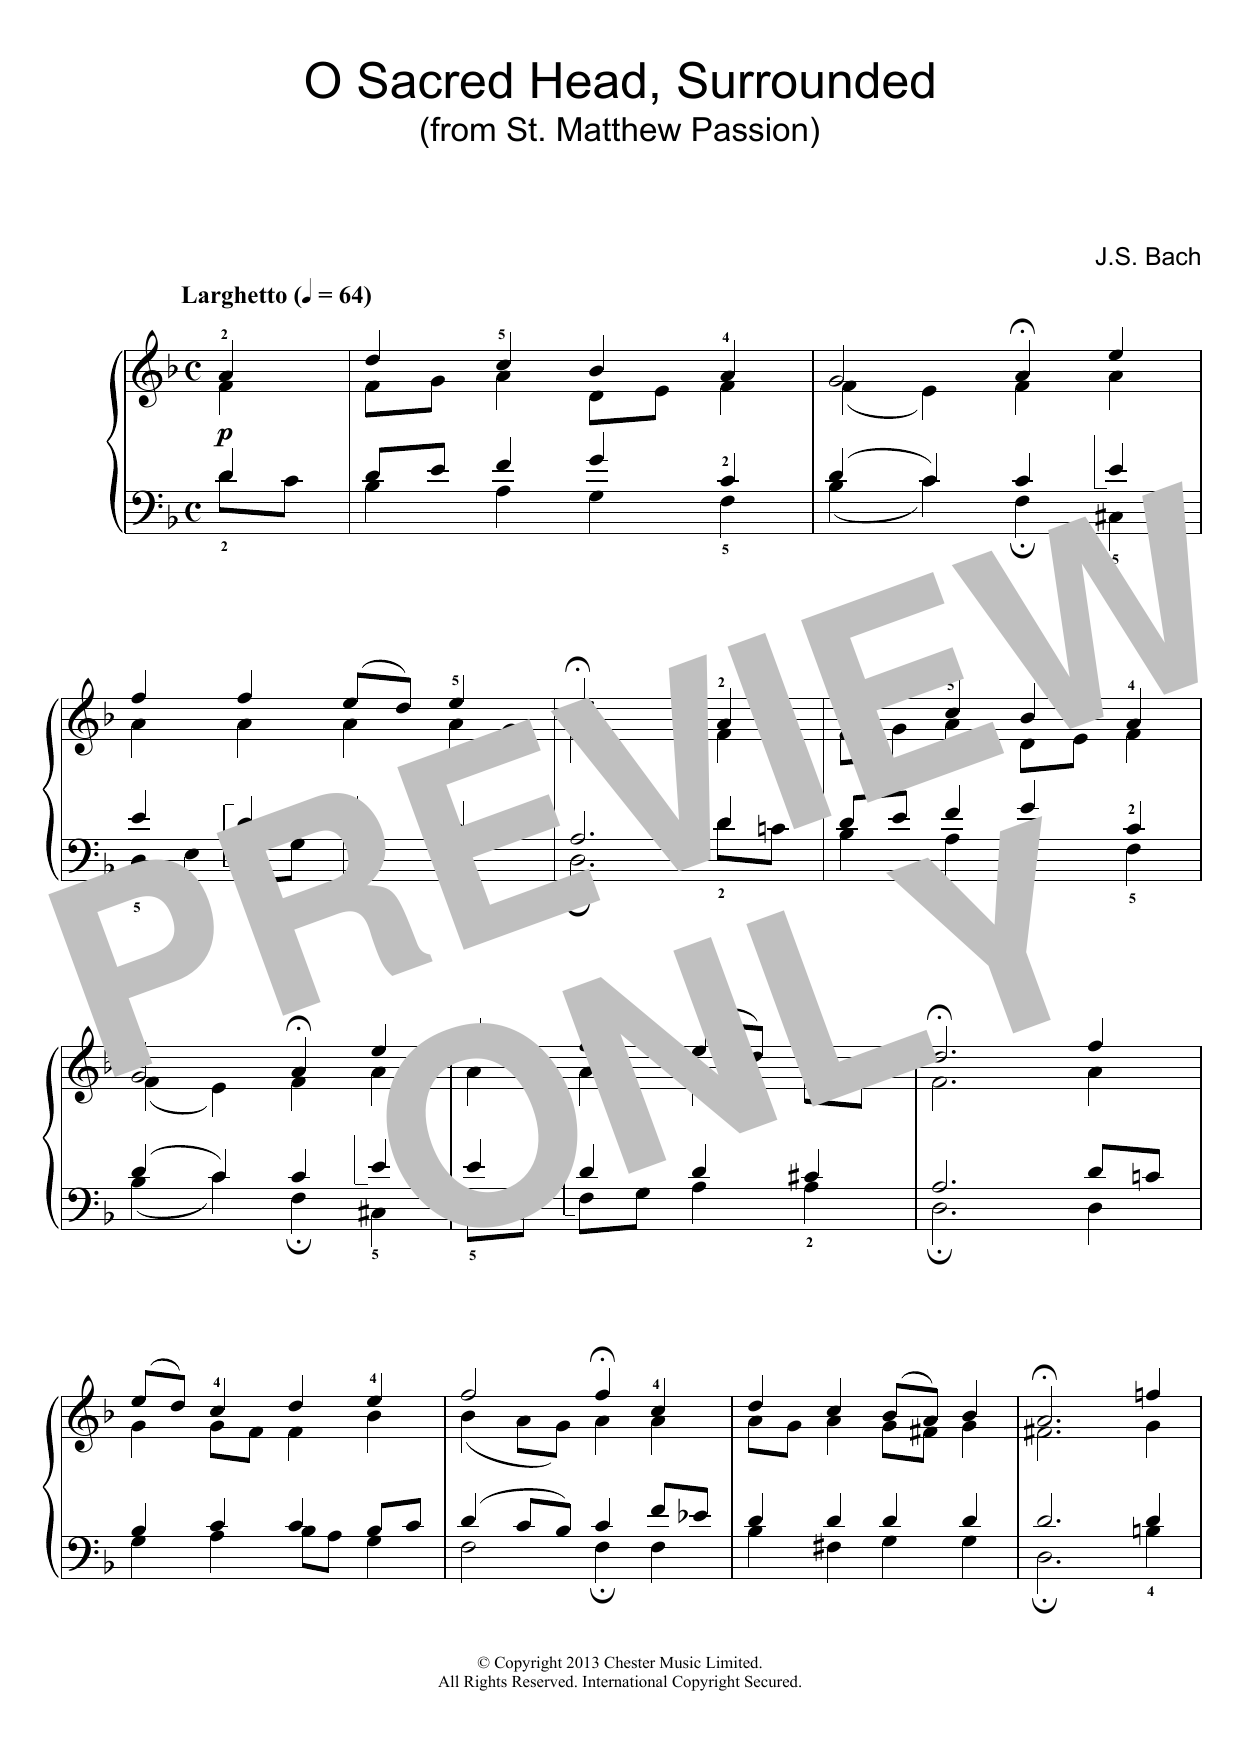 J.S. Bach O Sacred Head, Surrounded (from St Matthew Passion) sheet music preview music notes and score for Piano including 2 page(s)